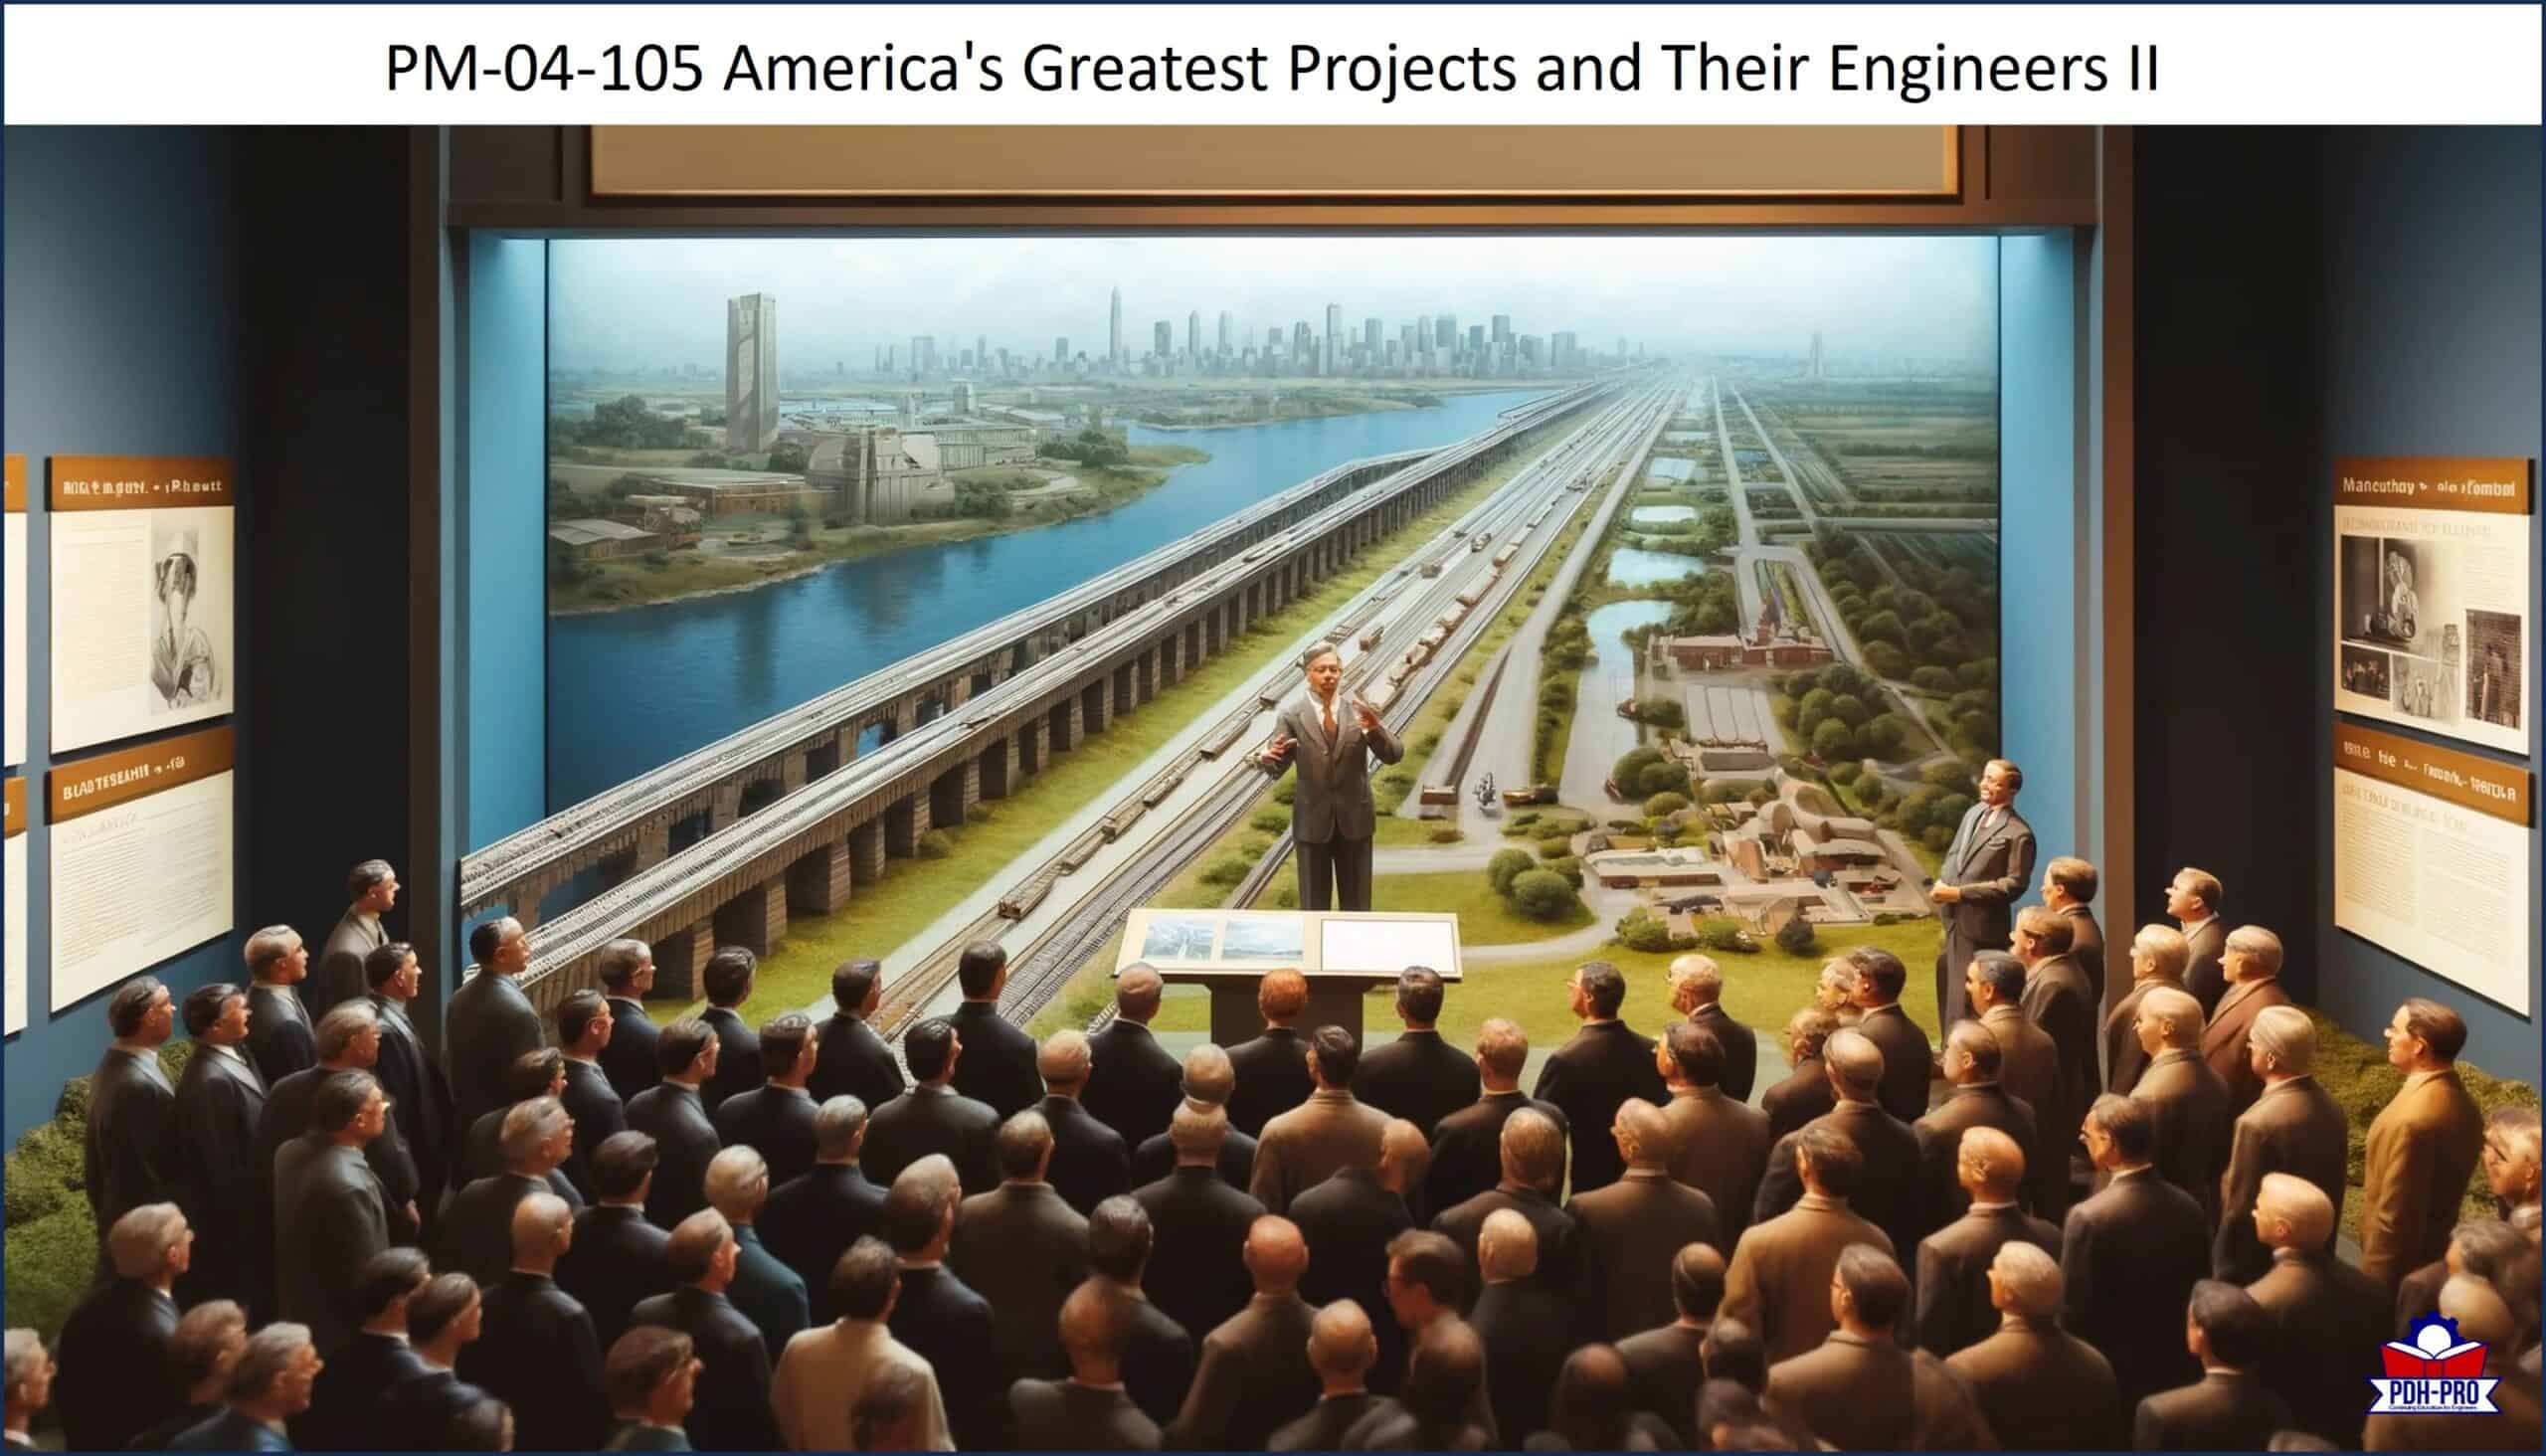 America's Greatest Projects and Their Engineers II